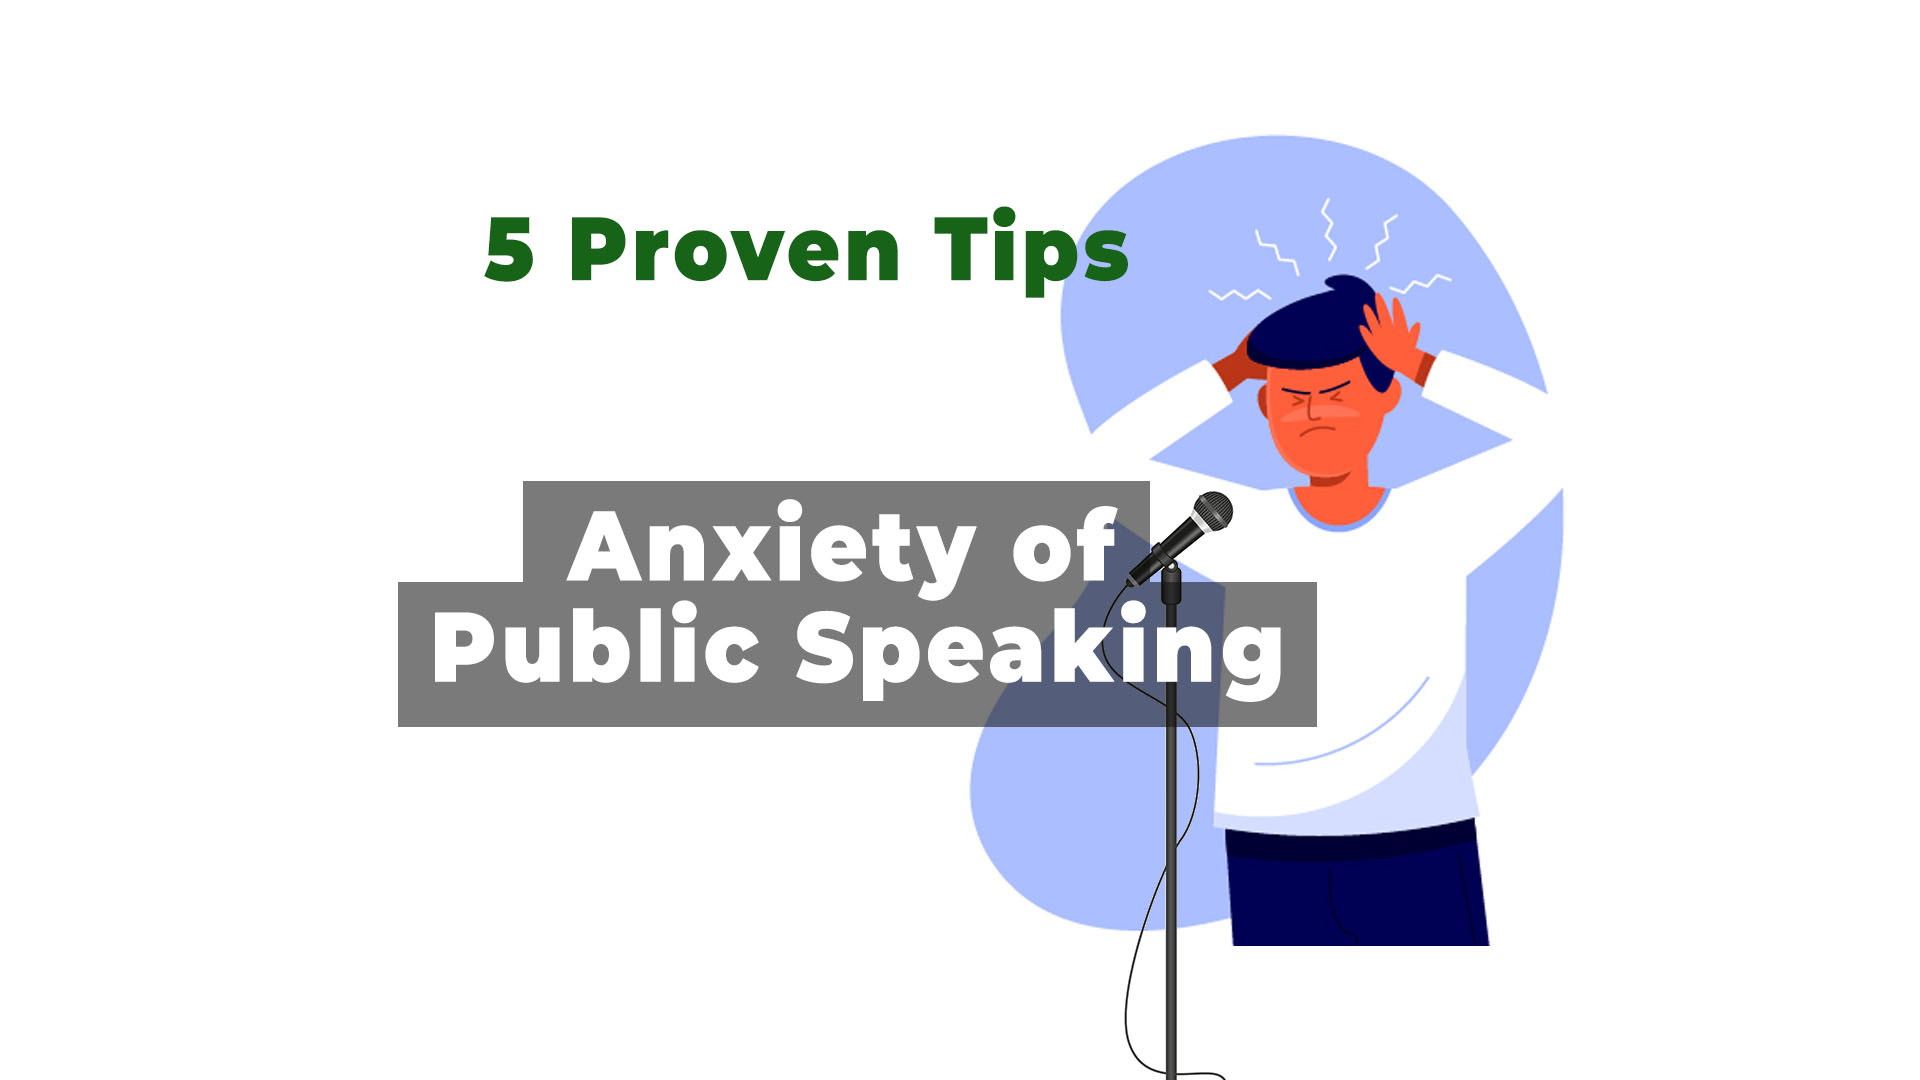 Anxiety of public speaking